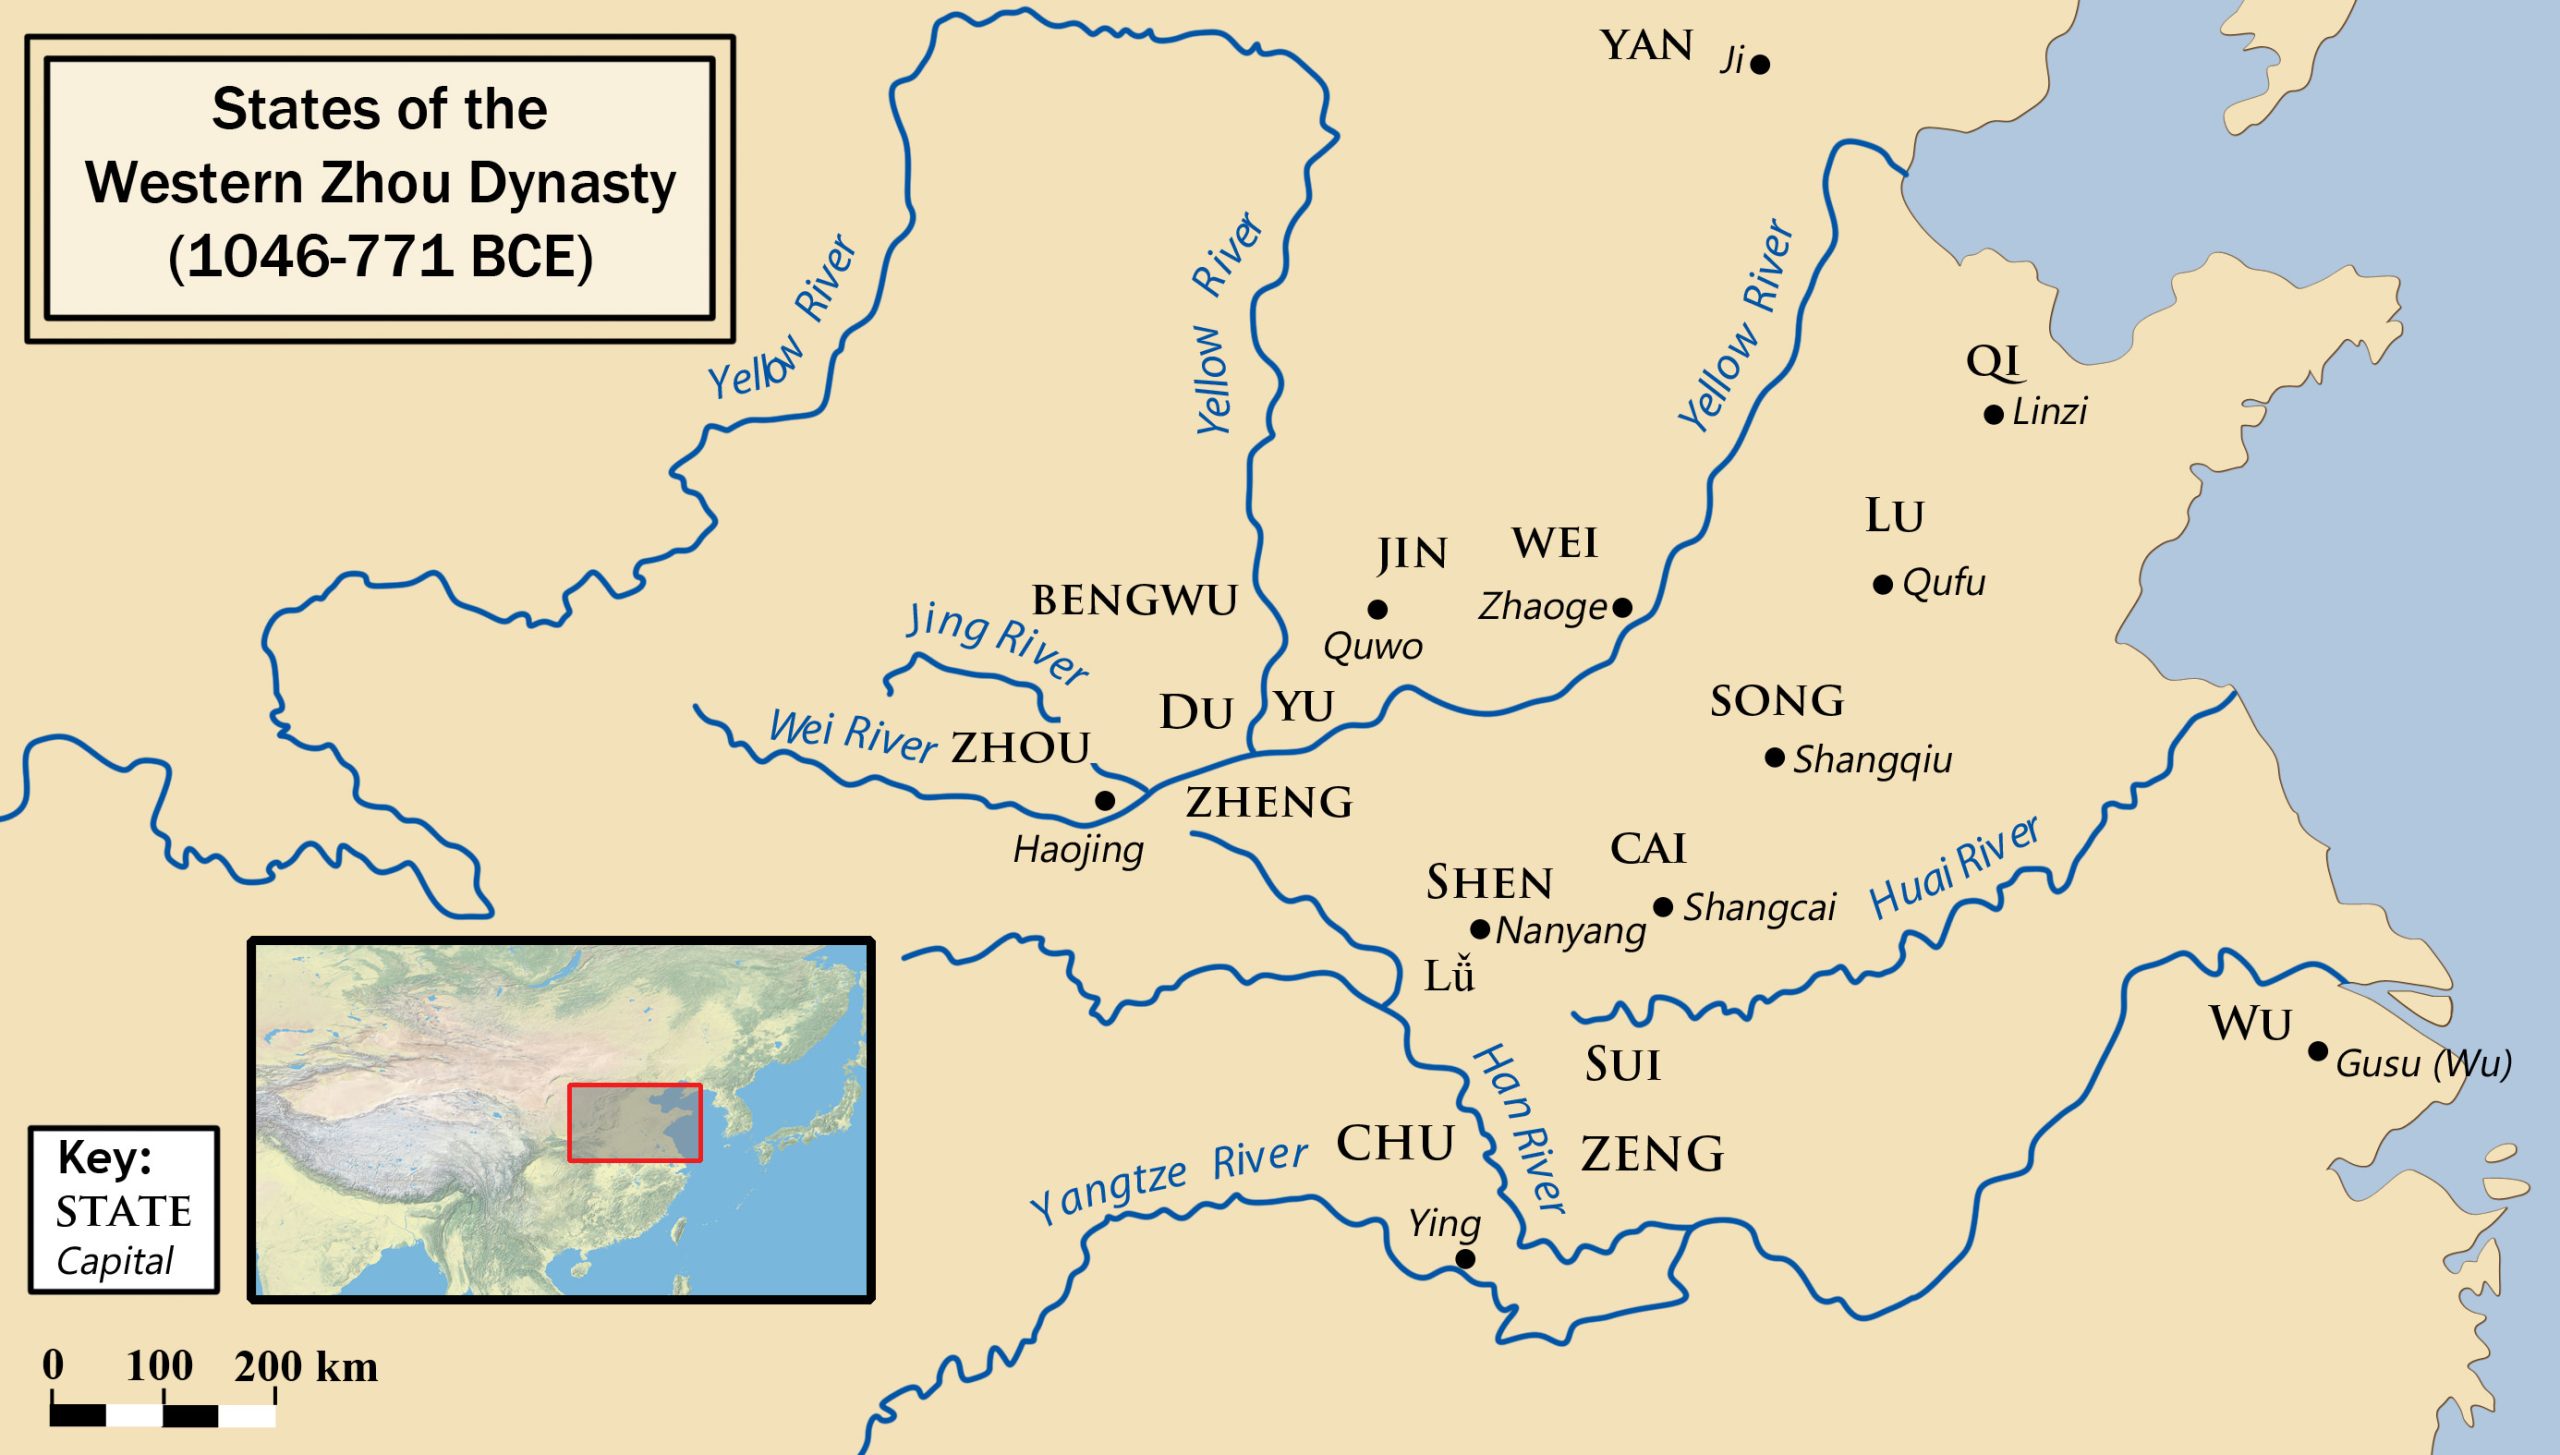 A map of the states of the Western Zhou Dynasty (1046-771 BCE)